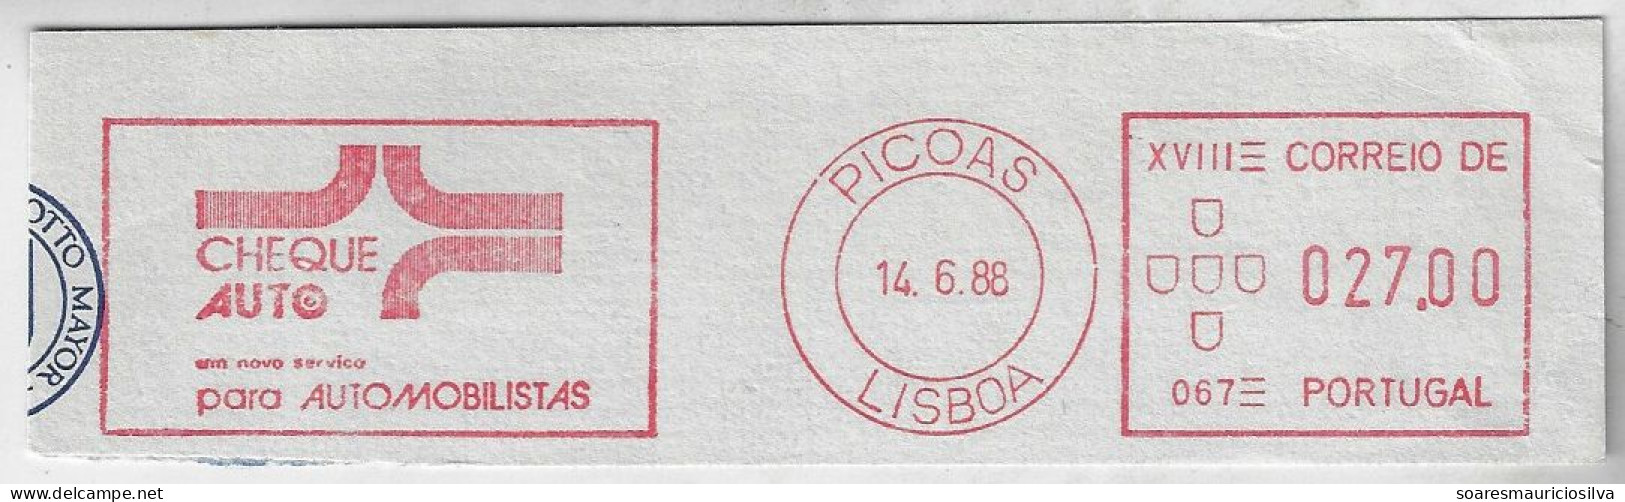 Portugal 1988 Cover Fragment Meter Stamp Hasler Mailmaster Slogan Check Auto A New Service For Motorists Lisbon Picoa - Lettres & Documents